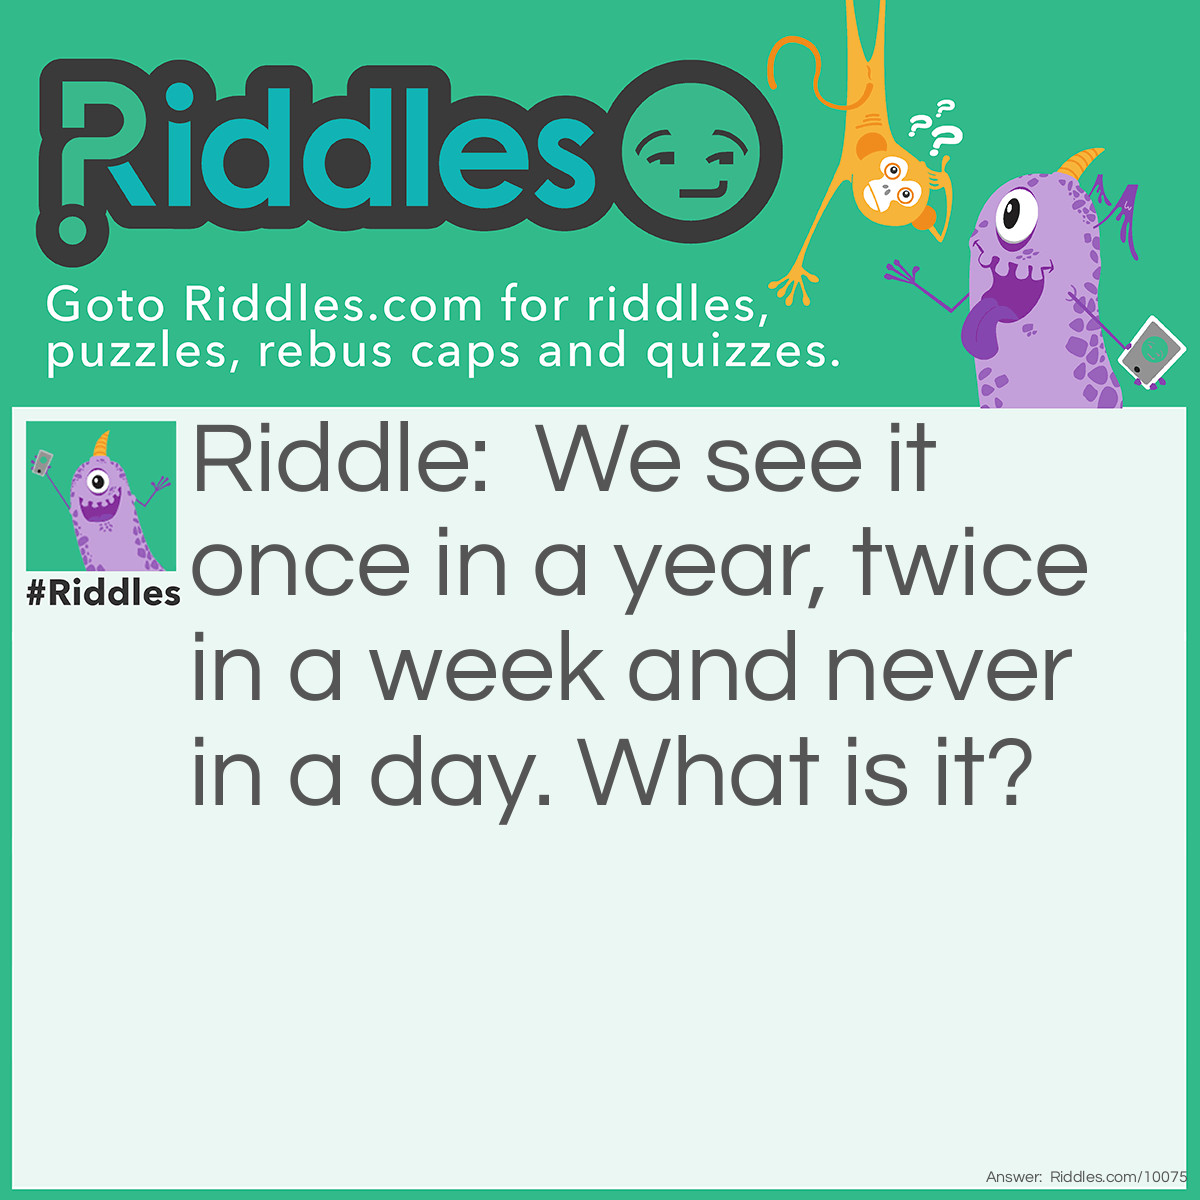 Riddle: We see it once in a year, twice in a week and never in a day. What is it? Answer: The Letter E.